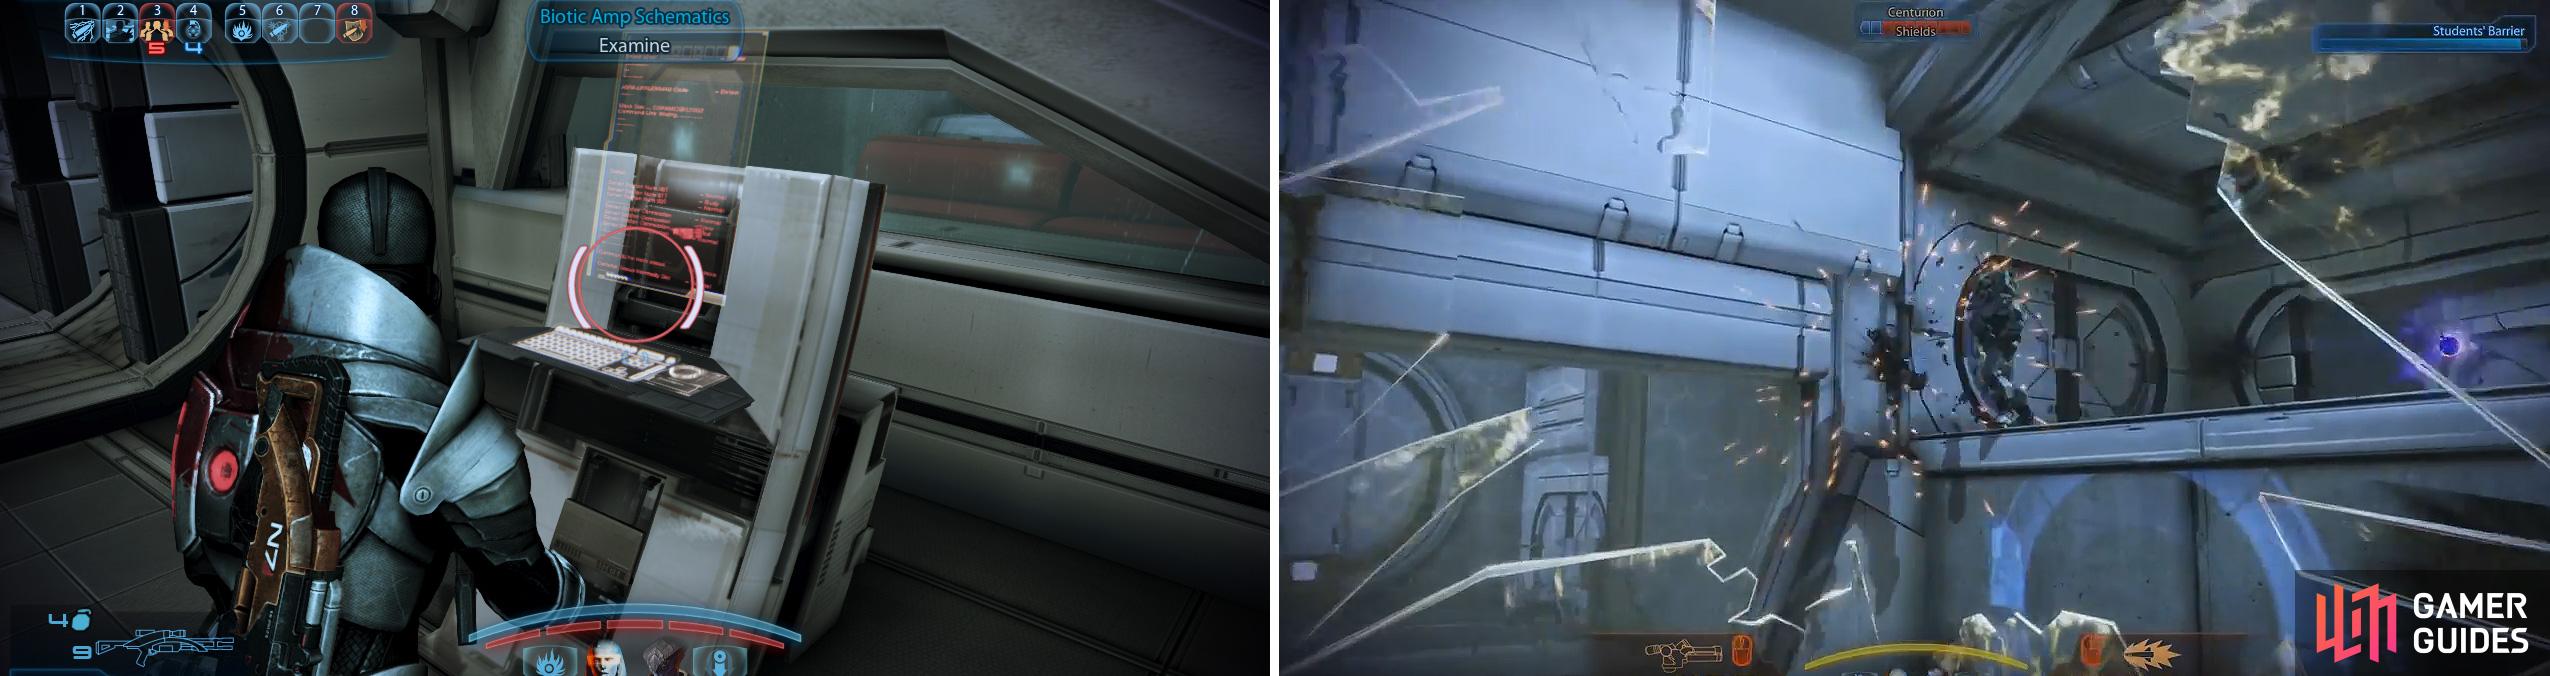 Collect the Biotic Amp Schematics (left) here. Later, when inside the Atlas (right), use the turret and ignore the melee attack unless enemies overrun you.